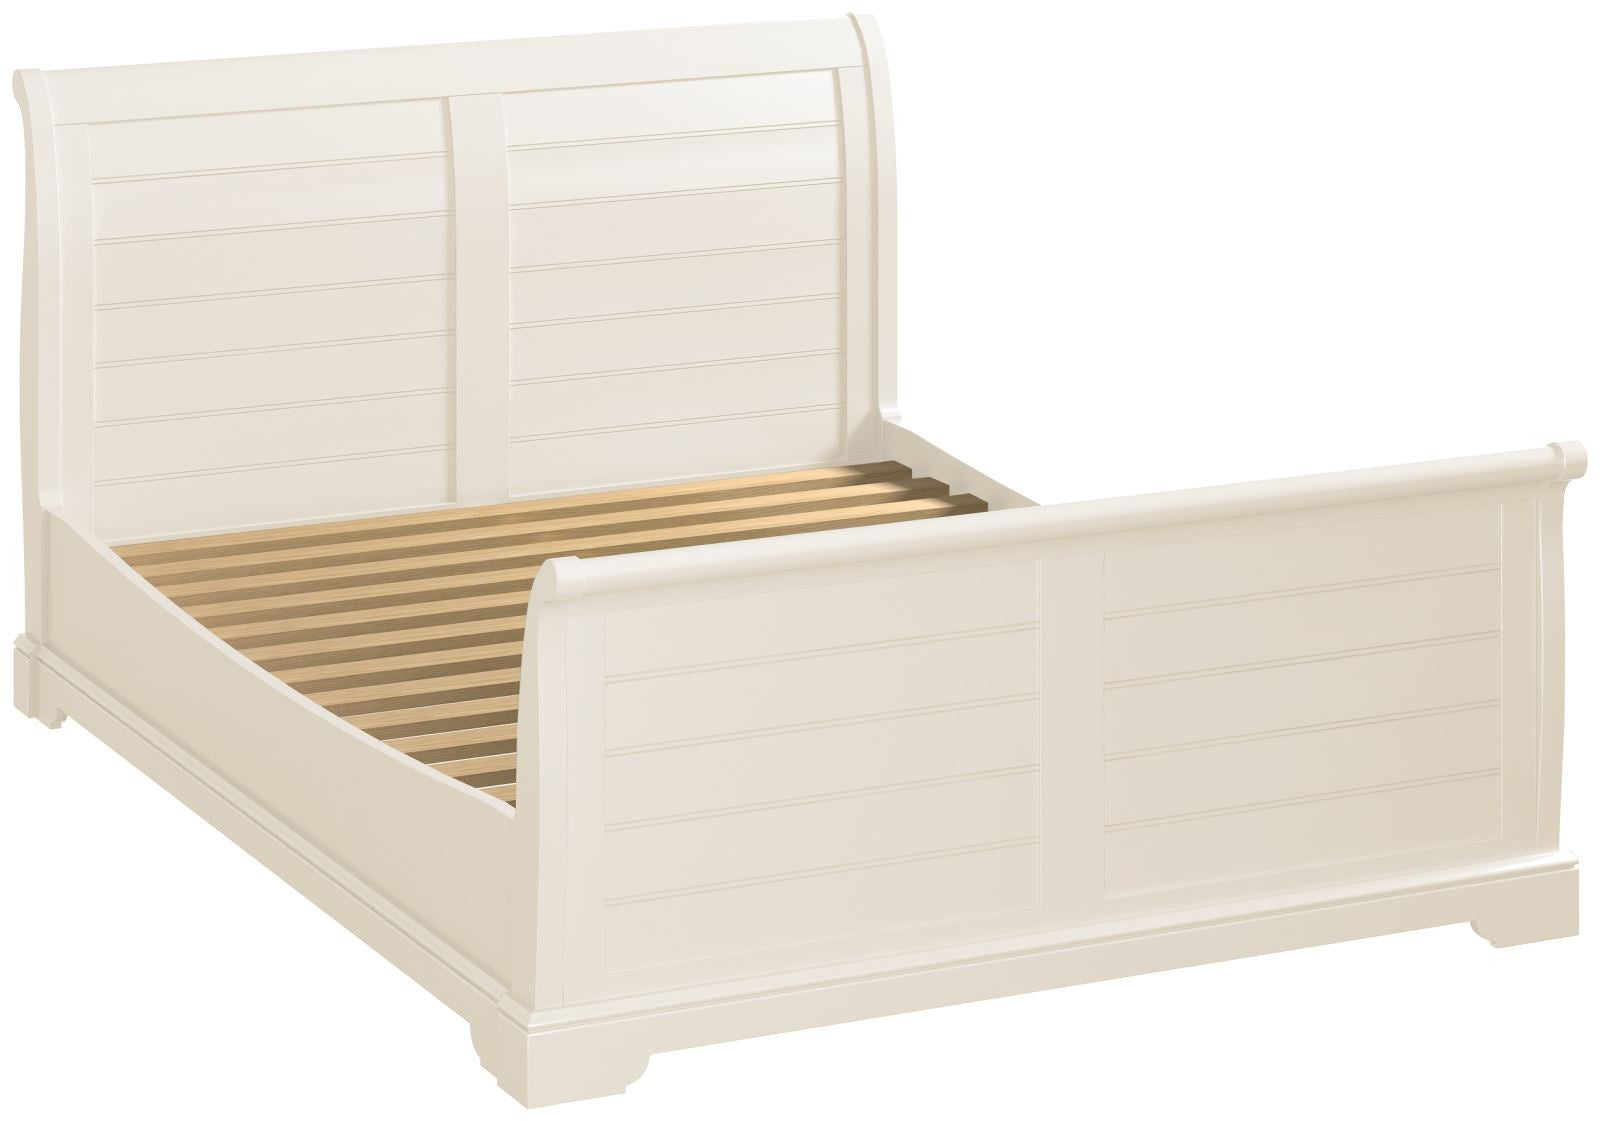 Lilibet Bed Super King Sleigh